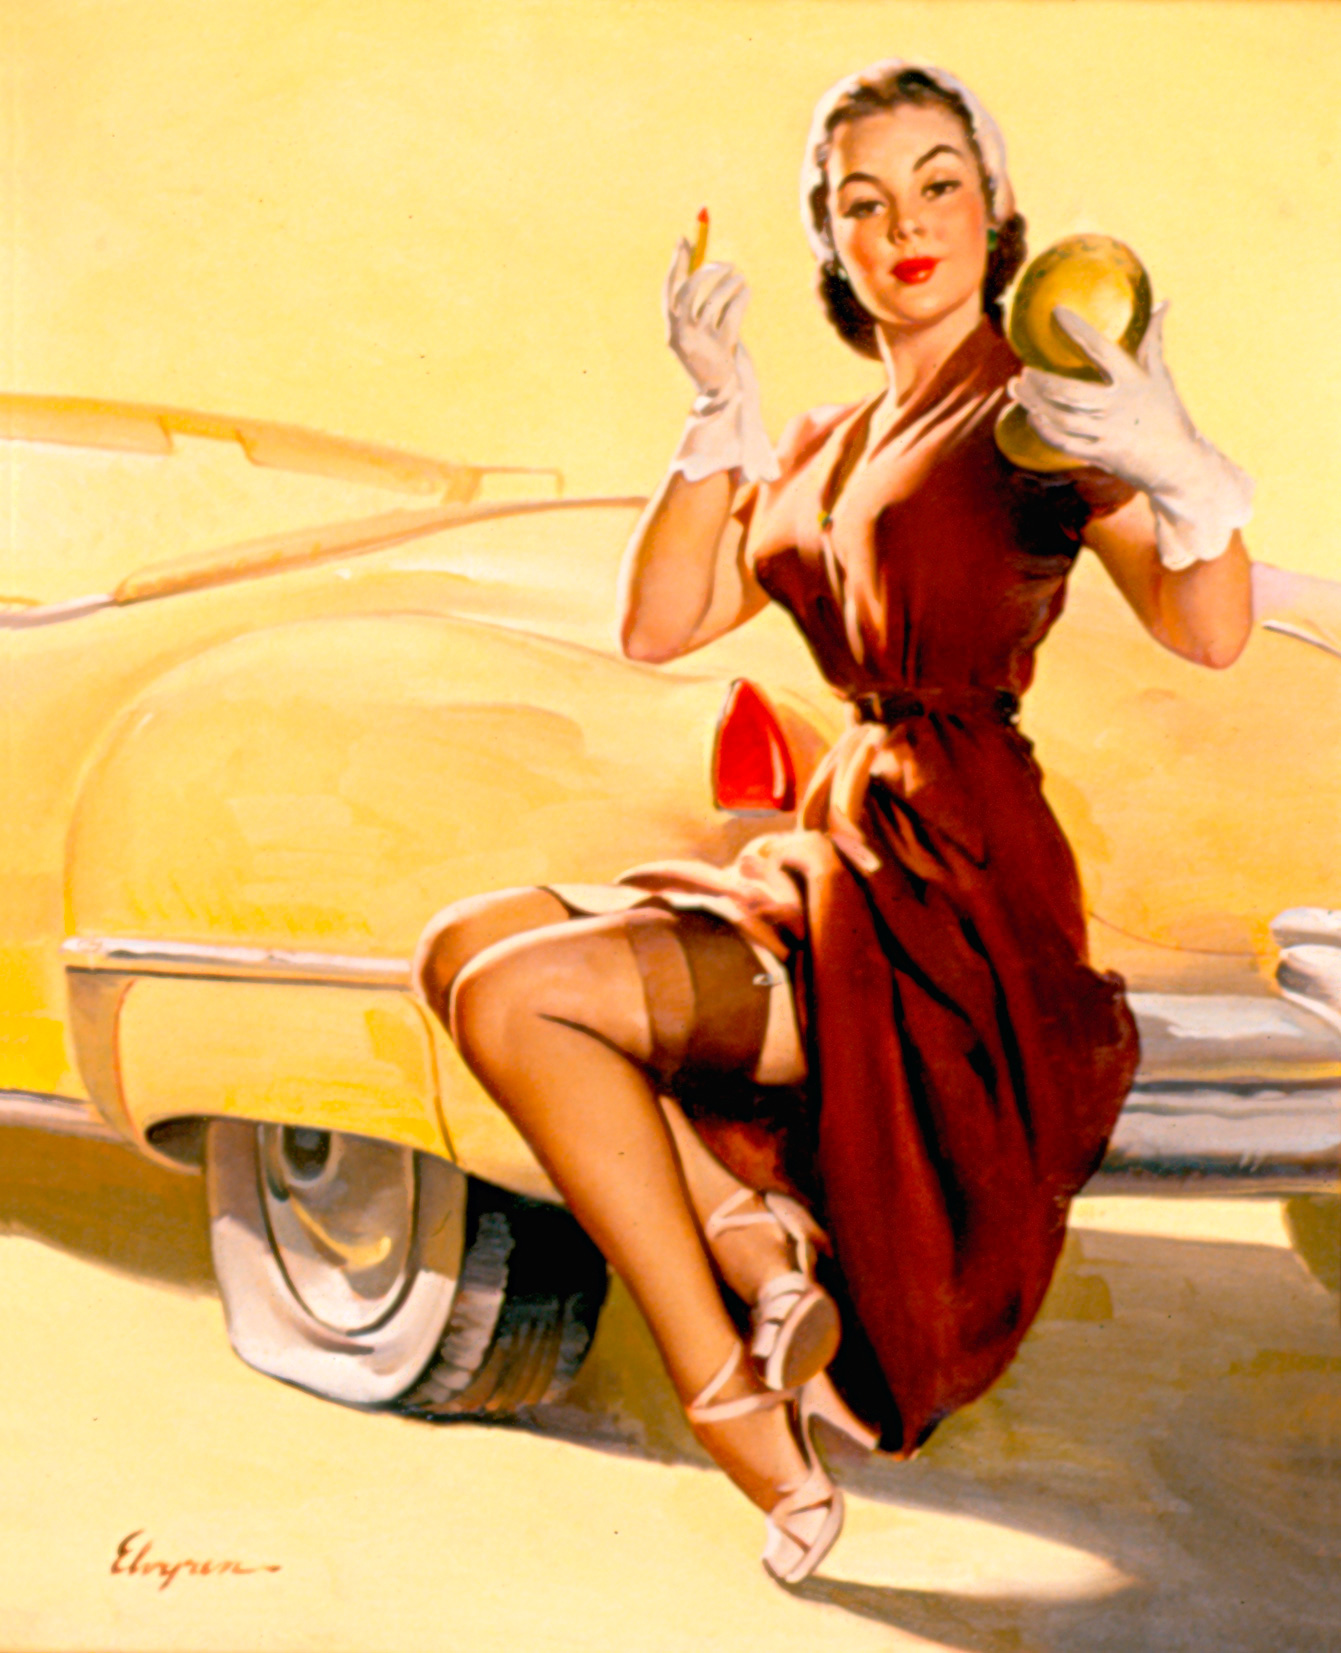 There's awesome chicks from any era, however, the 40's pin-up era...